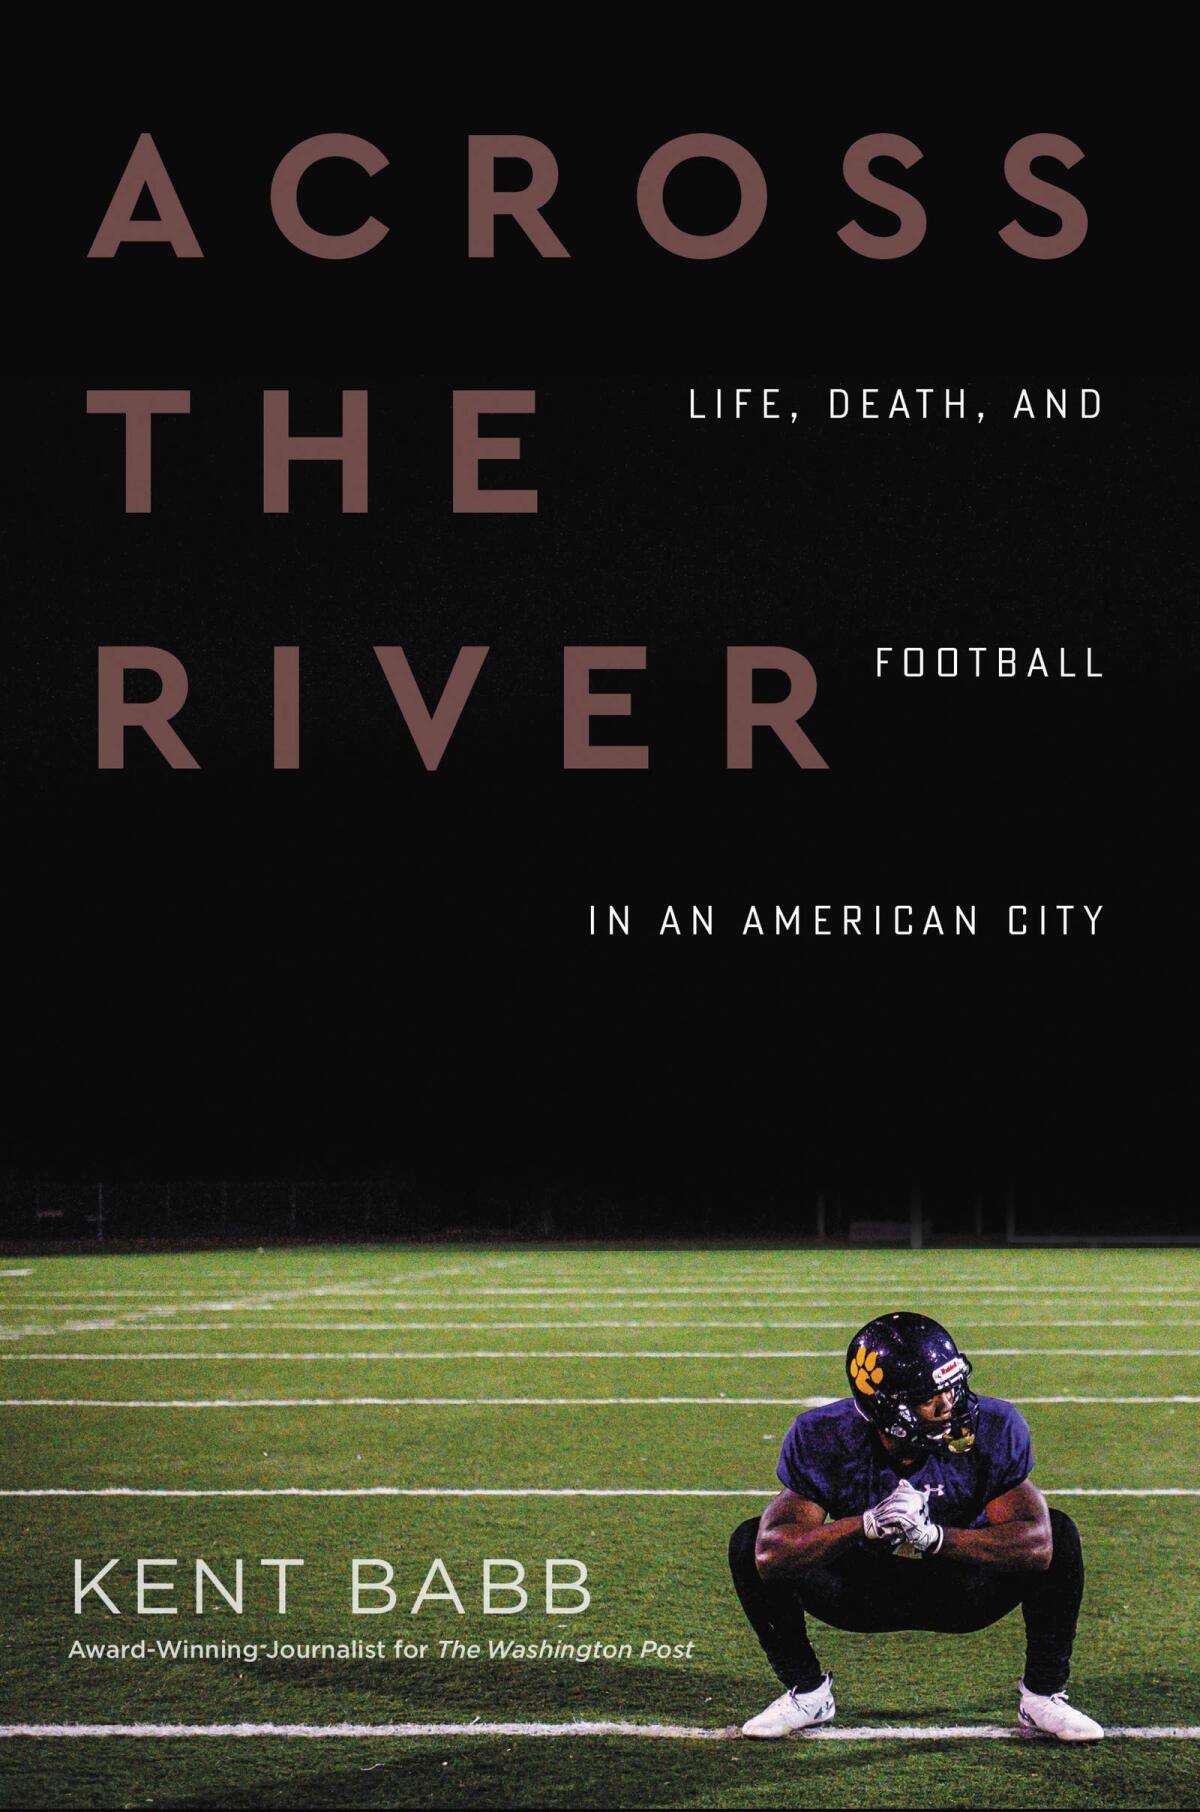 "Across the River: Life, Death and Football in an American City" by Kent Babb